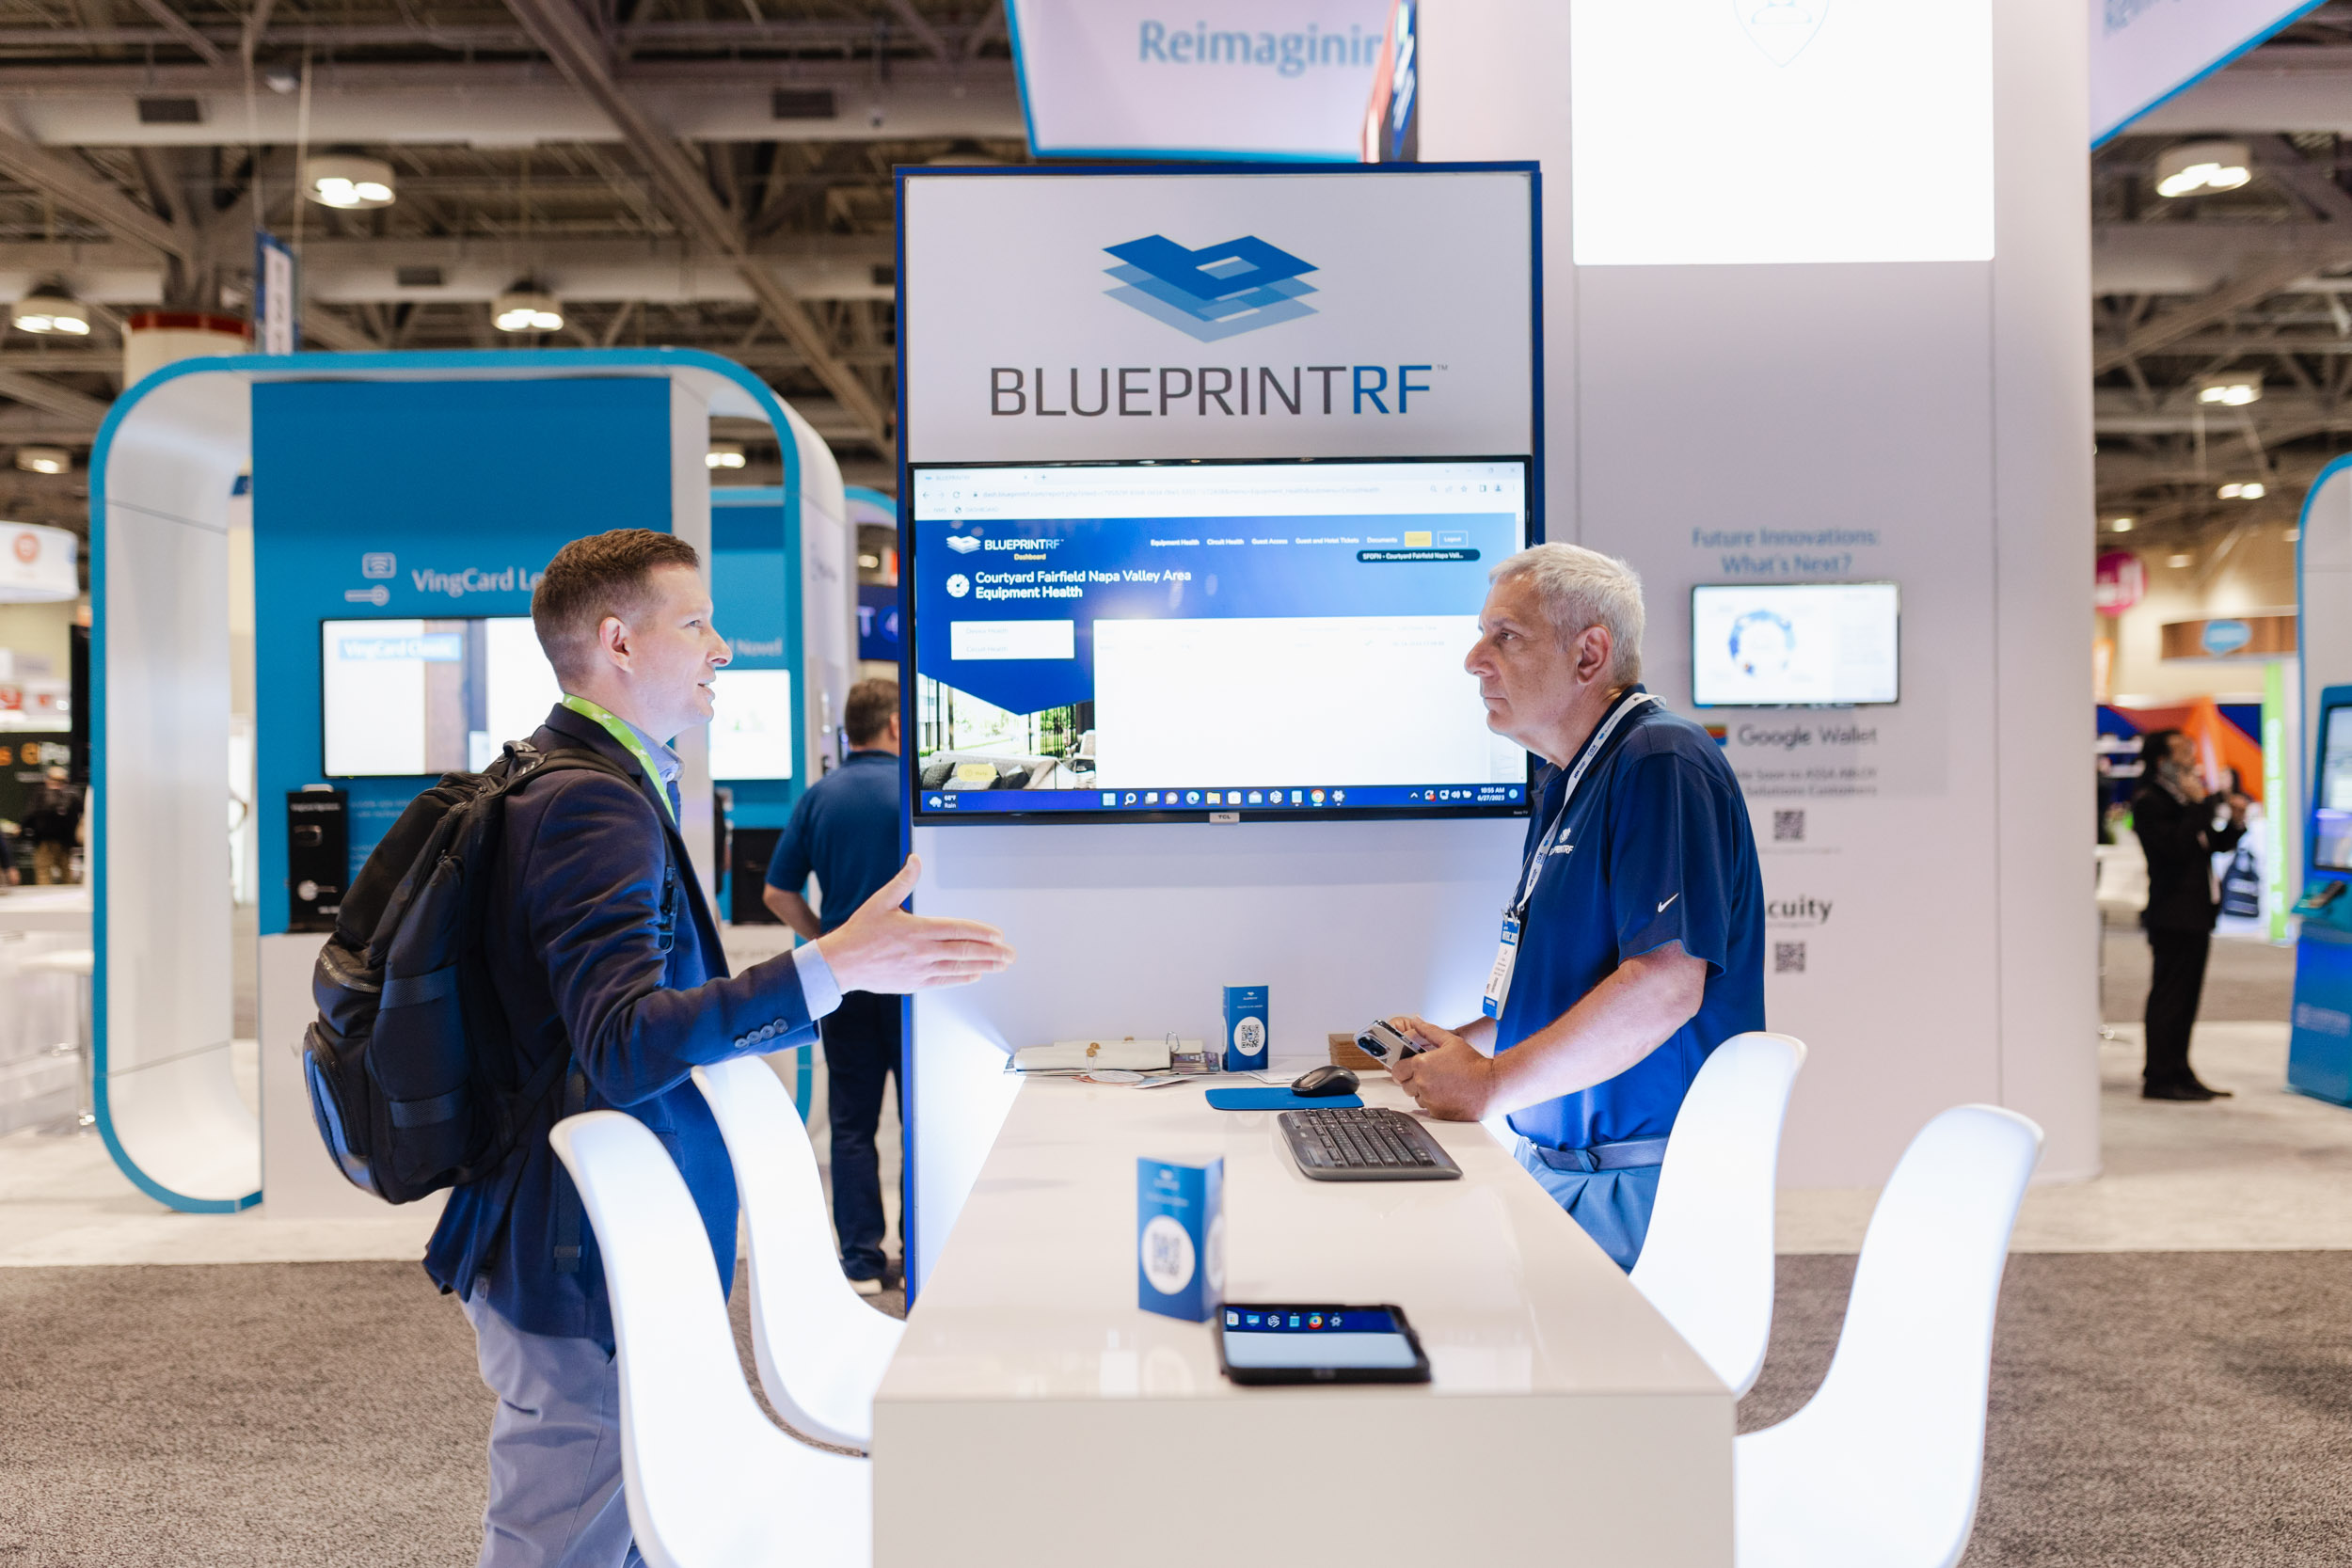 Two individuals discussing at a blueprint booth during a Toronto trade show.